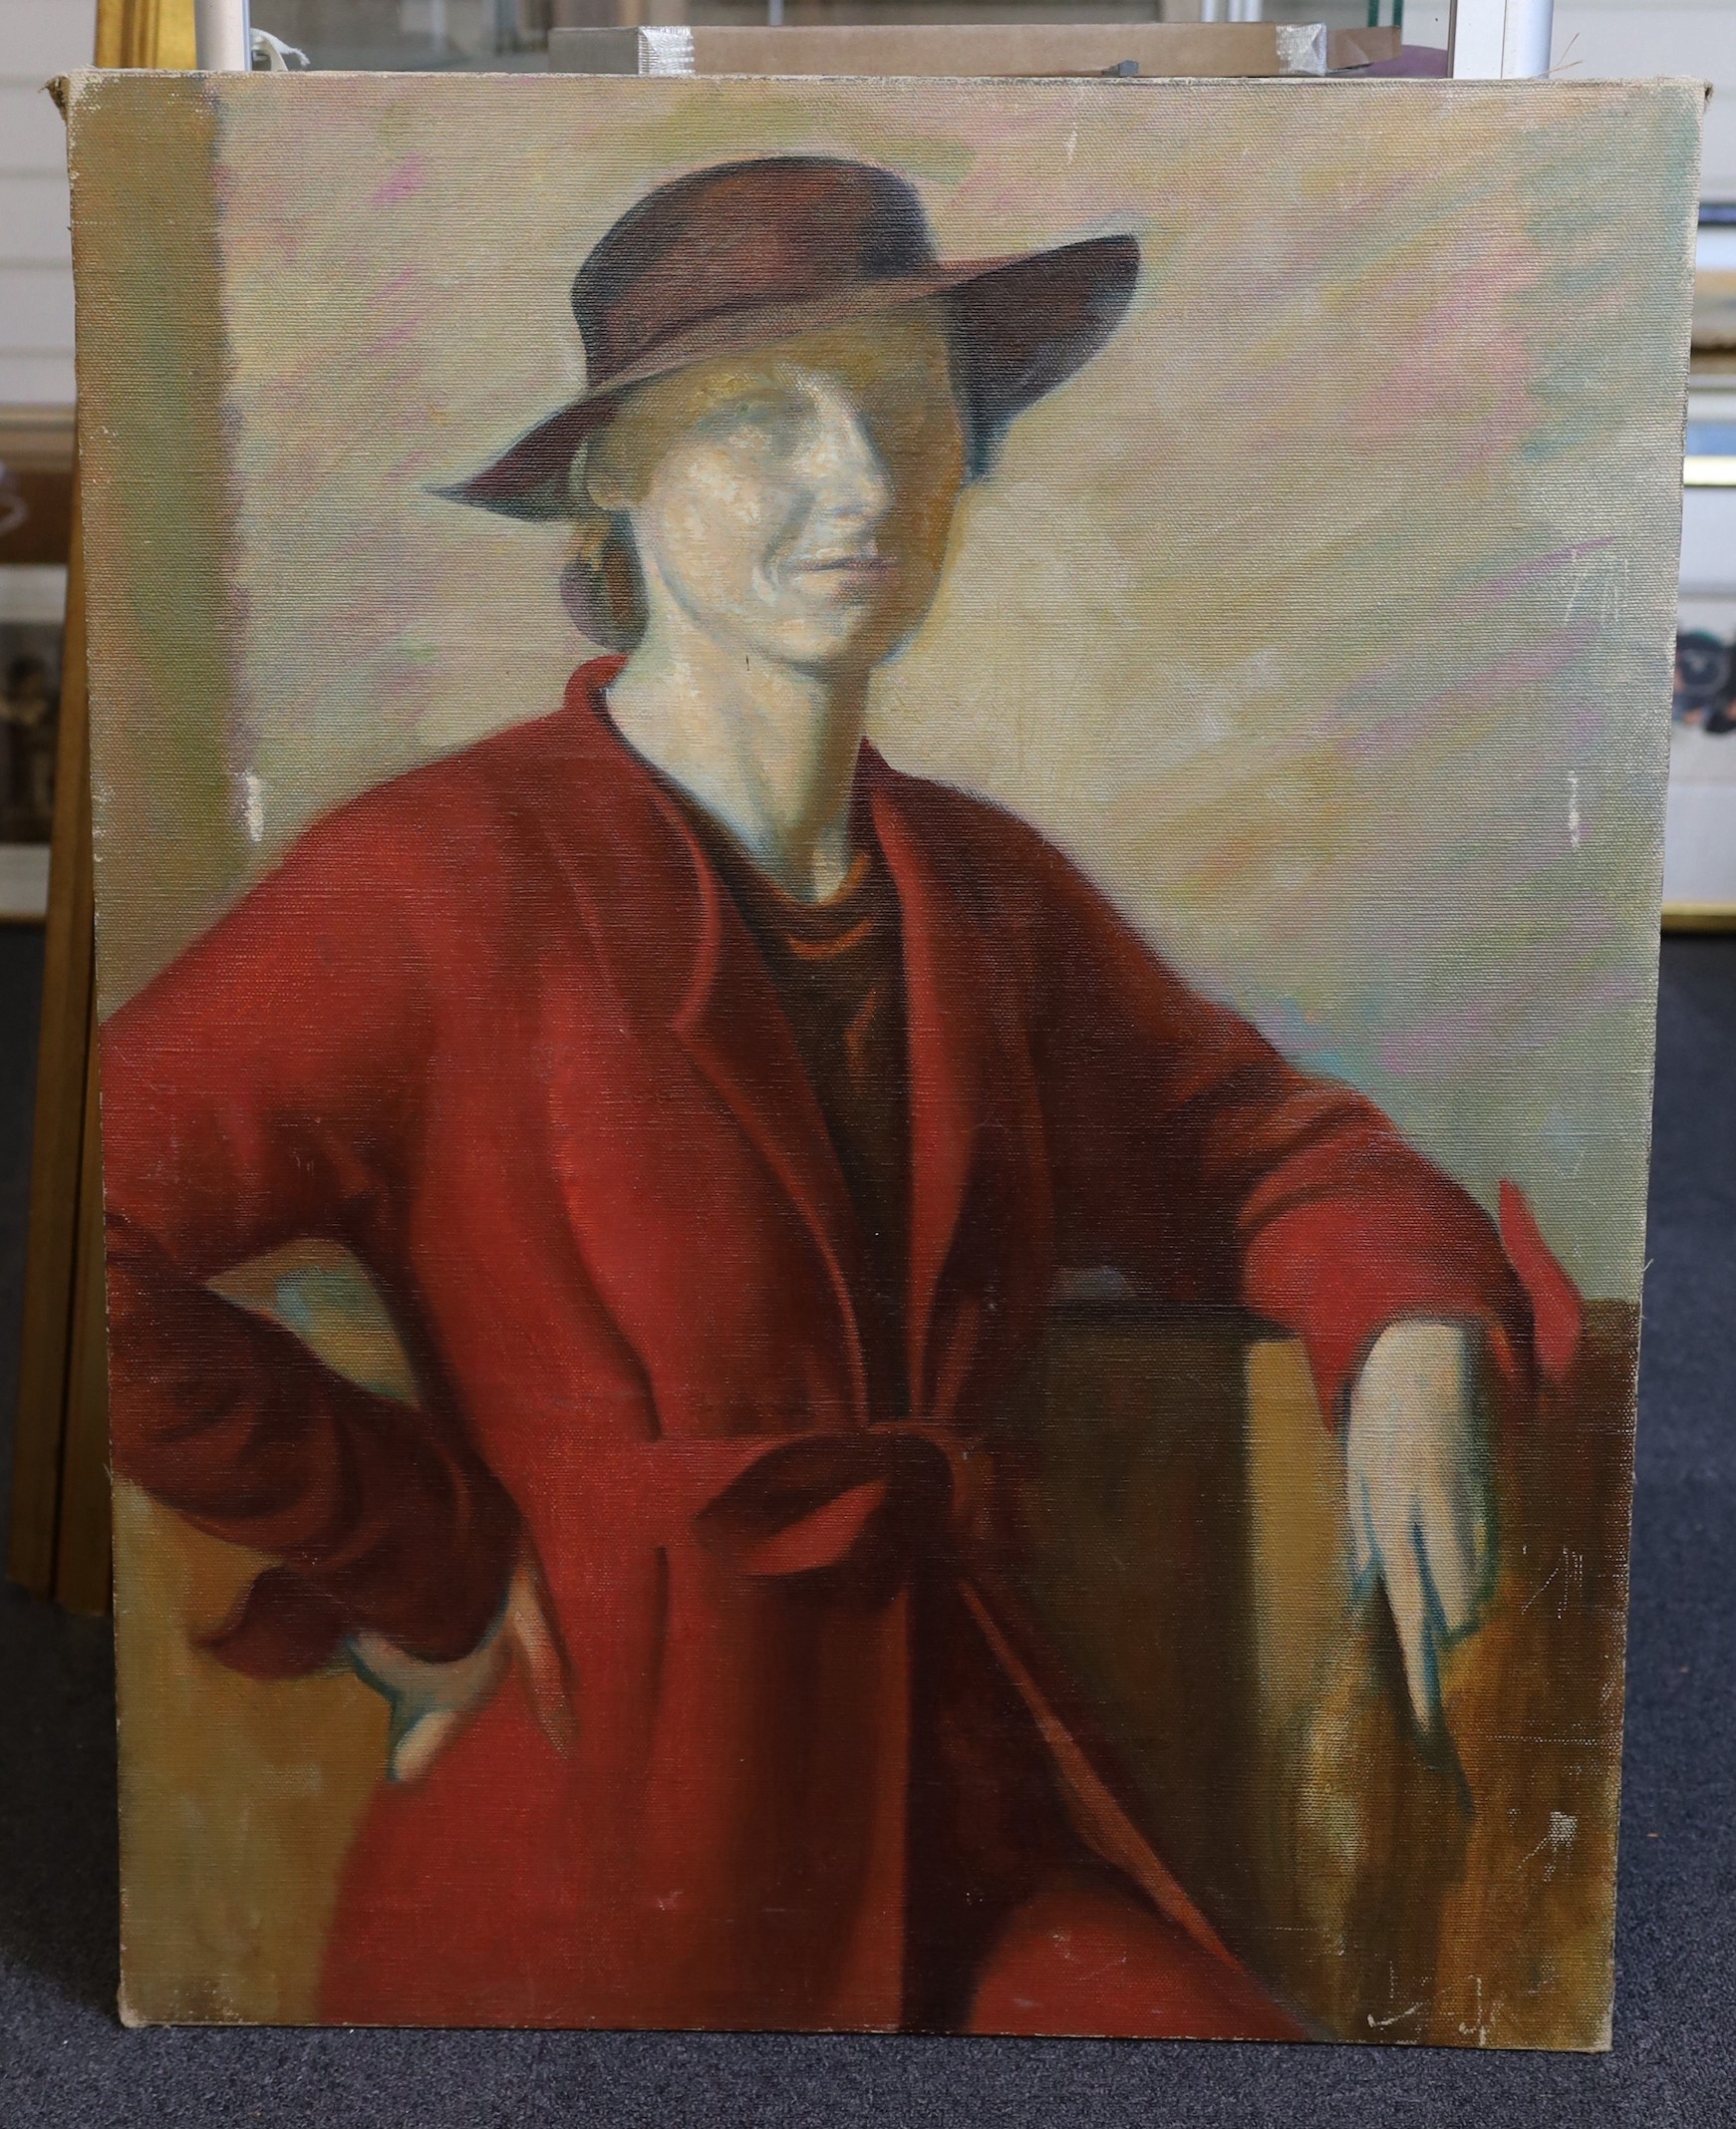 James Stroudley (British, 1906-1985), Portrait of a woman wearing a red coat, oil on canvas, 92 x 71cm, unframed